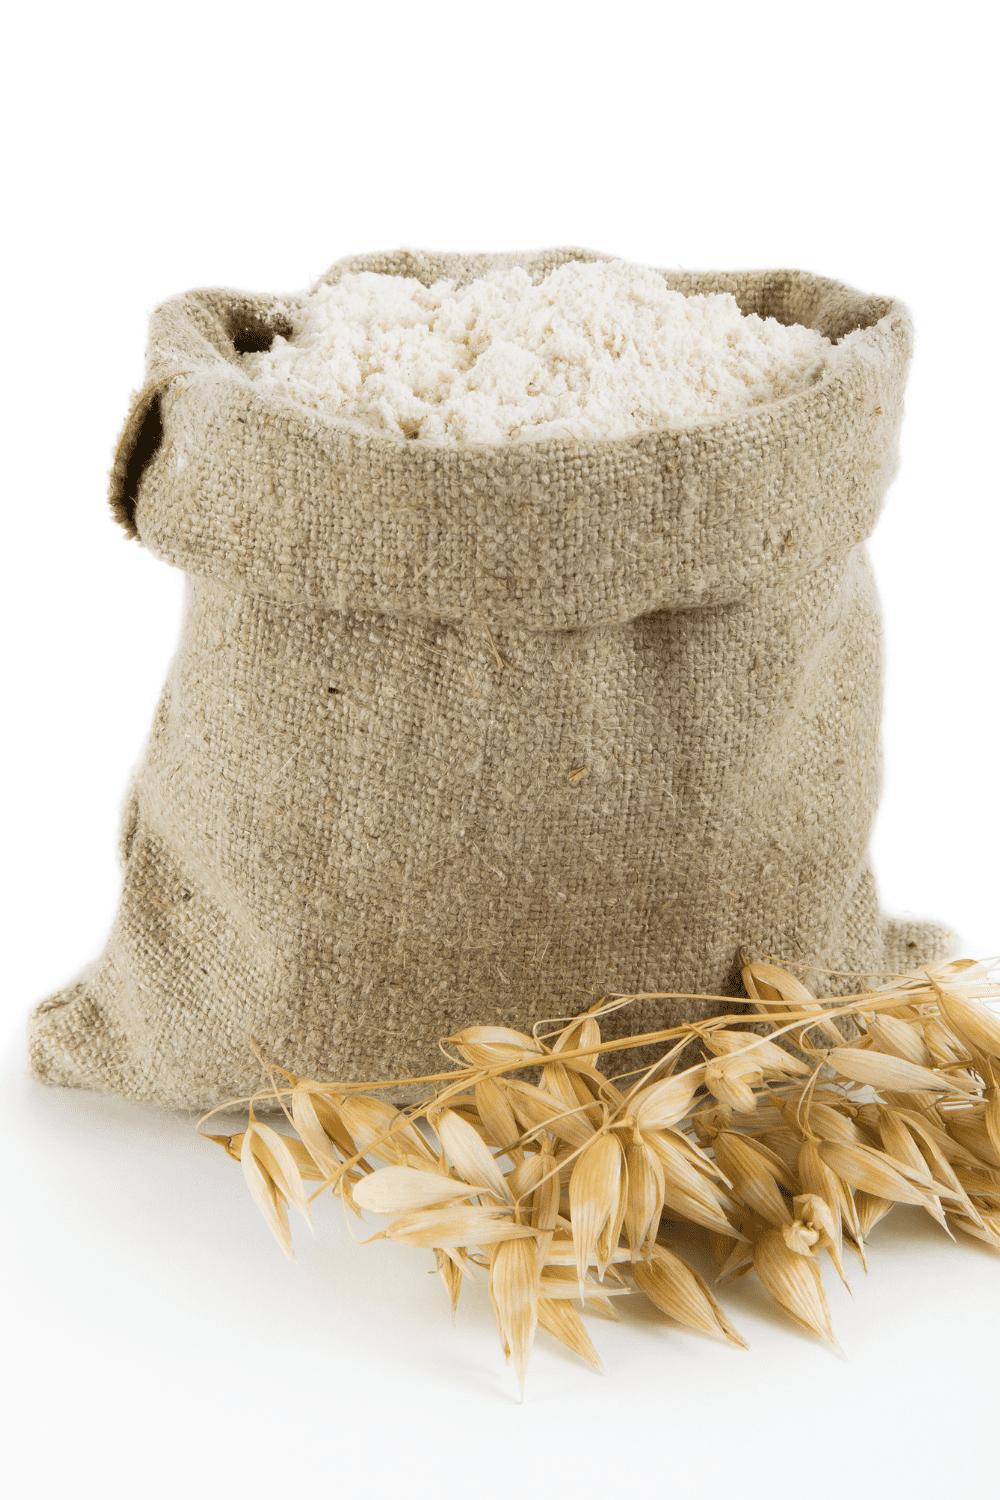 oat fiber in burlap bag with oats next to it